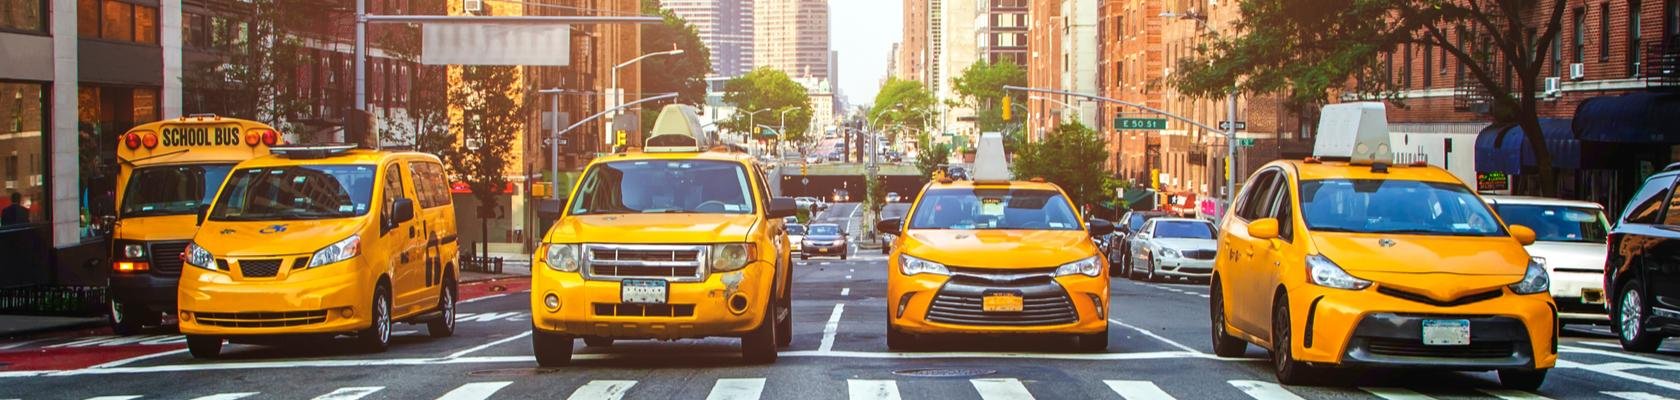 Taxi's New York